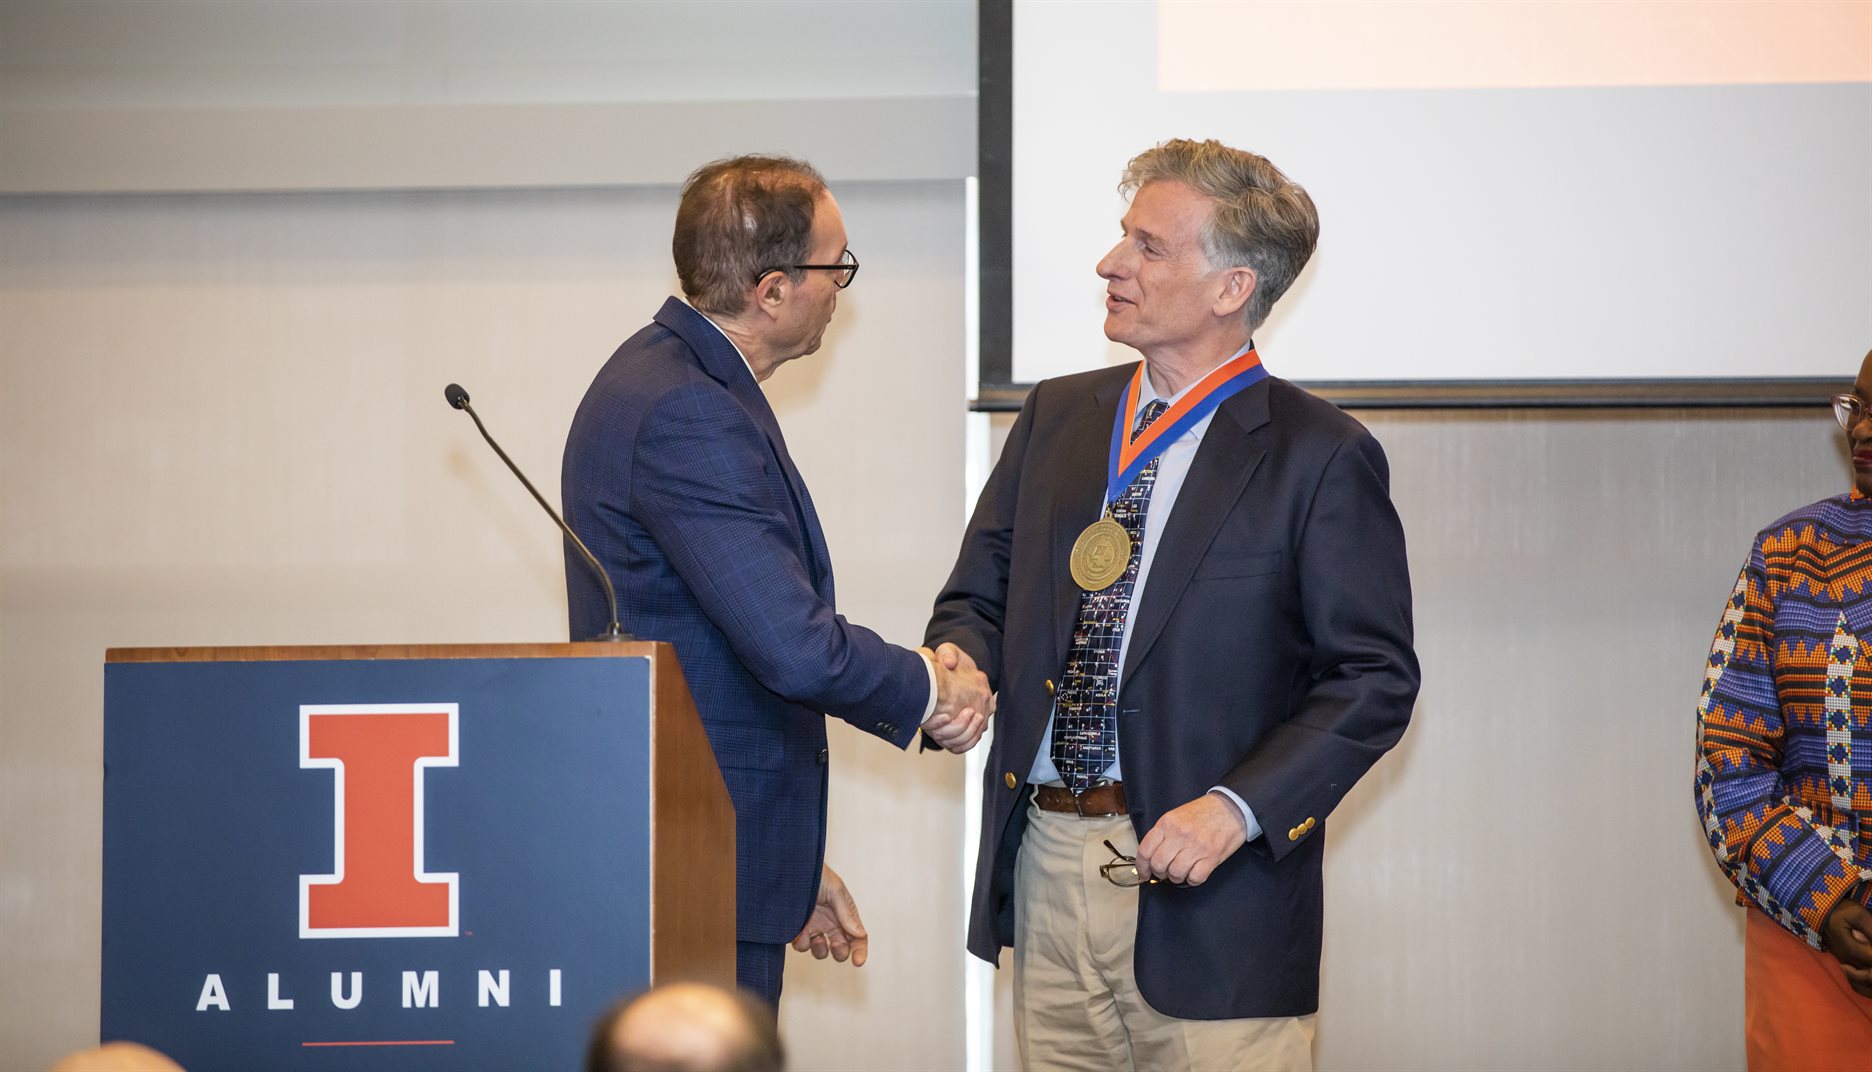 University of Illinois Urbana-Champaign Provost John Coleman presents Physics and Astronomy Professor Charles Gammie with a medal on the occasion of his investiture as the Ikenberry Endowed Chair.